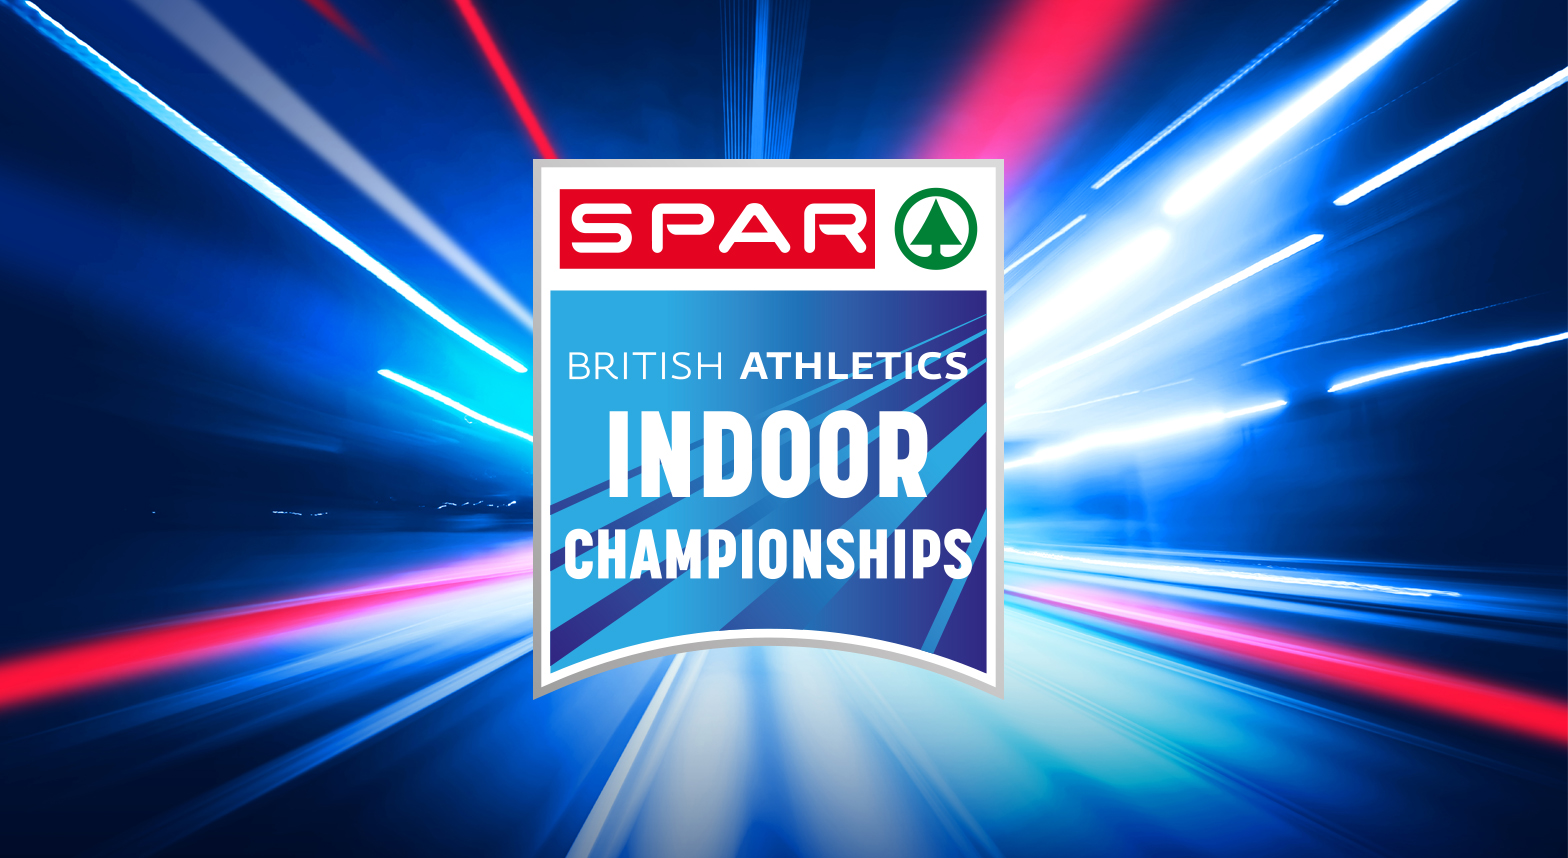 The British Athletics Indoor Championships 2018 takes place at Arena Birmingham between 17th-18th February